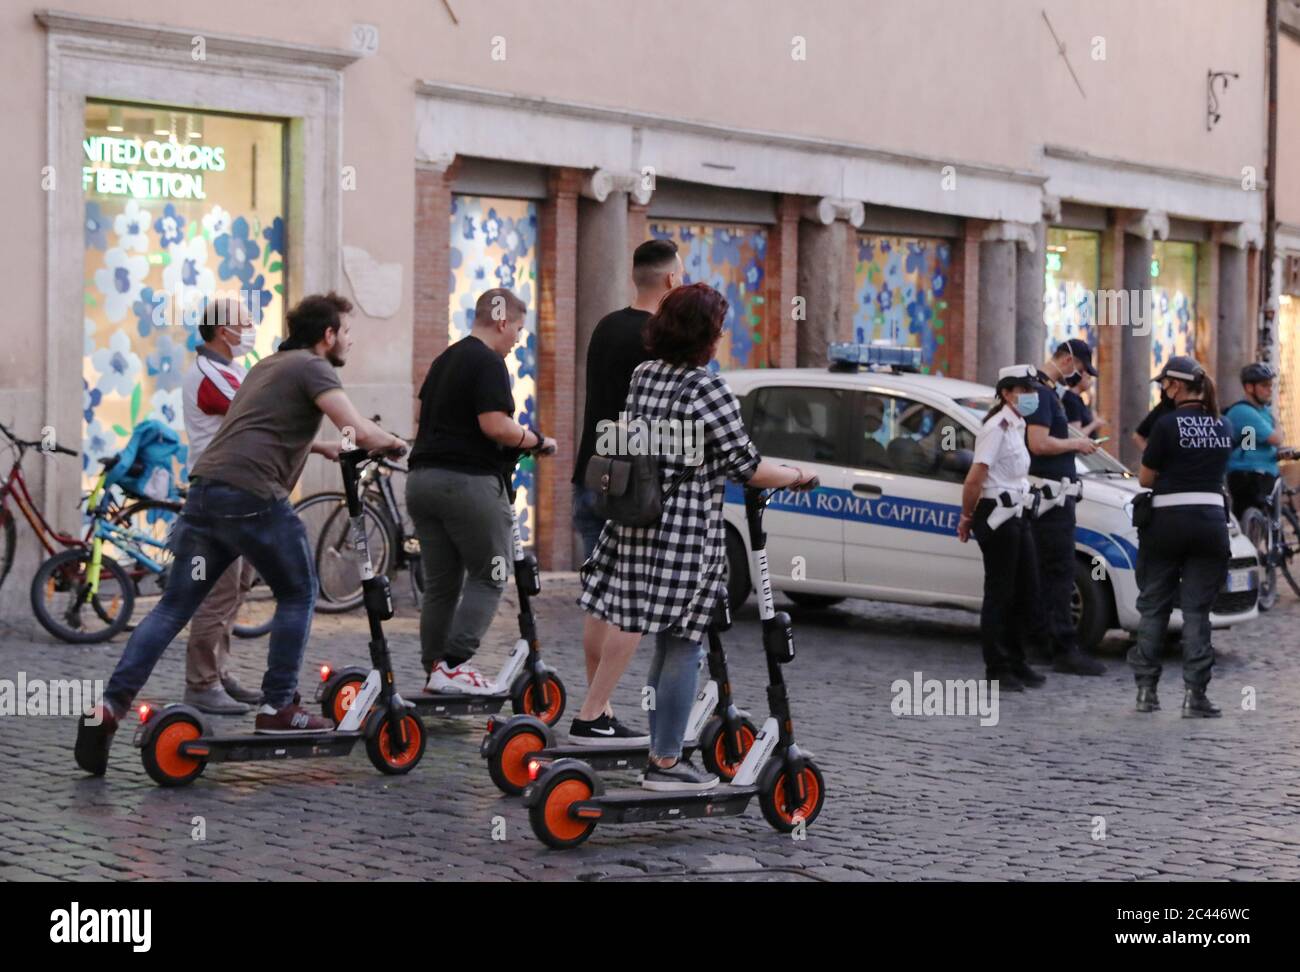 Rome, Italy. 23rd June, 2020. People ride electric scooters in Rome, Italy, June 23, 2020. As Italy continues to ease coronavirus lockdown rules, pedestrians returning to the streets are finding themselves competing for space with a kind of vehicle that hardly existed in the country before the lockdown -- electric scooters.TO GO WITH 'Feature: E-scooters enter into Italian city streets amid pandemic, fail to please all' Credit: Cheng Tingting/Xinhua/Alamy Live News Stock Photo